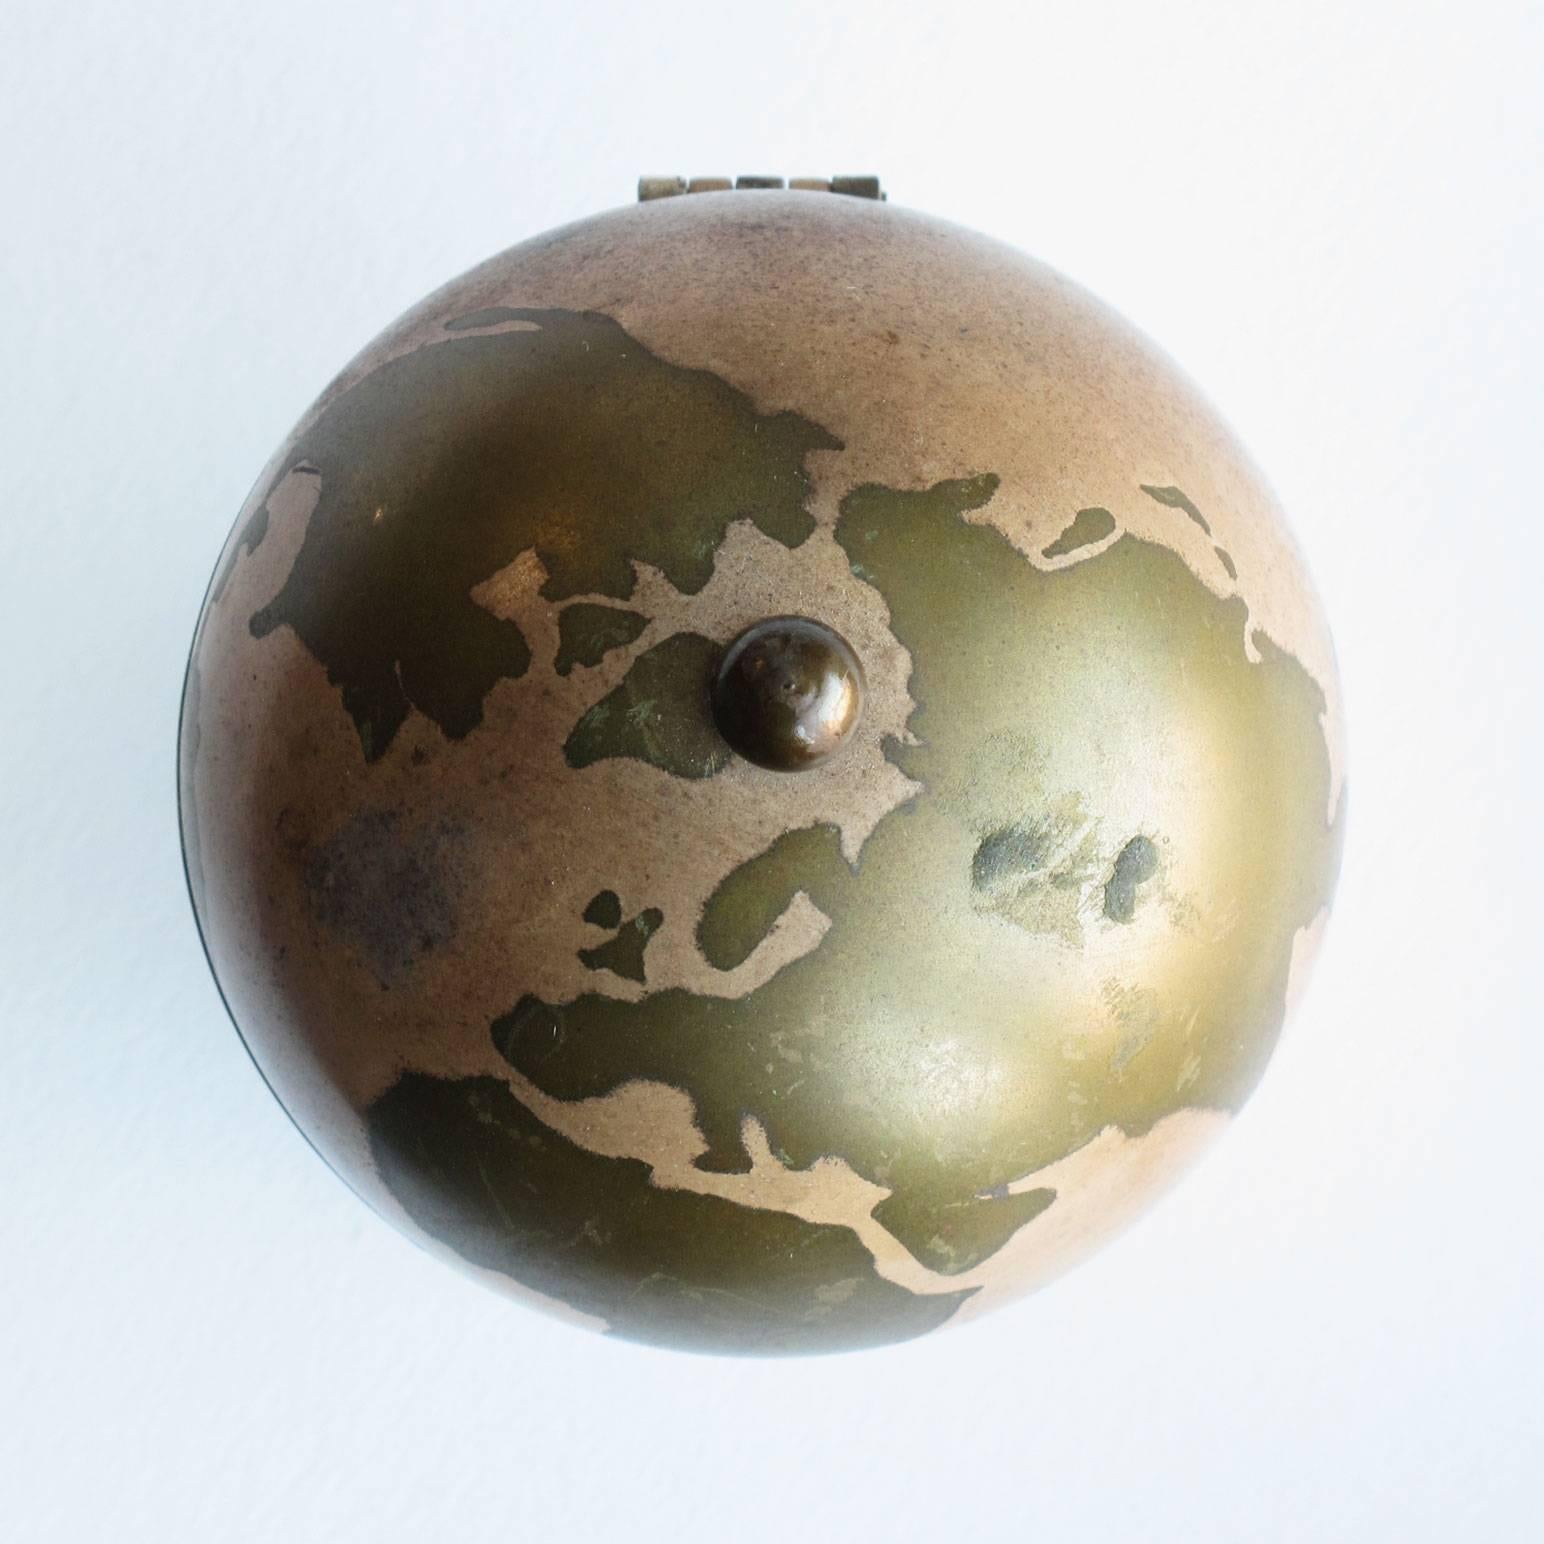 Brass decorative object with world globe design, good vintage condition with patina to surfaces. Measures: 3.5 high x 2.5 diameter.